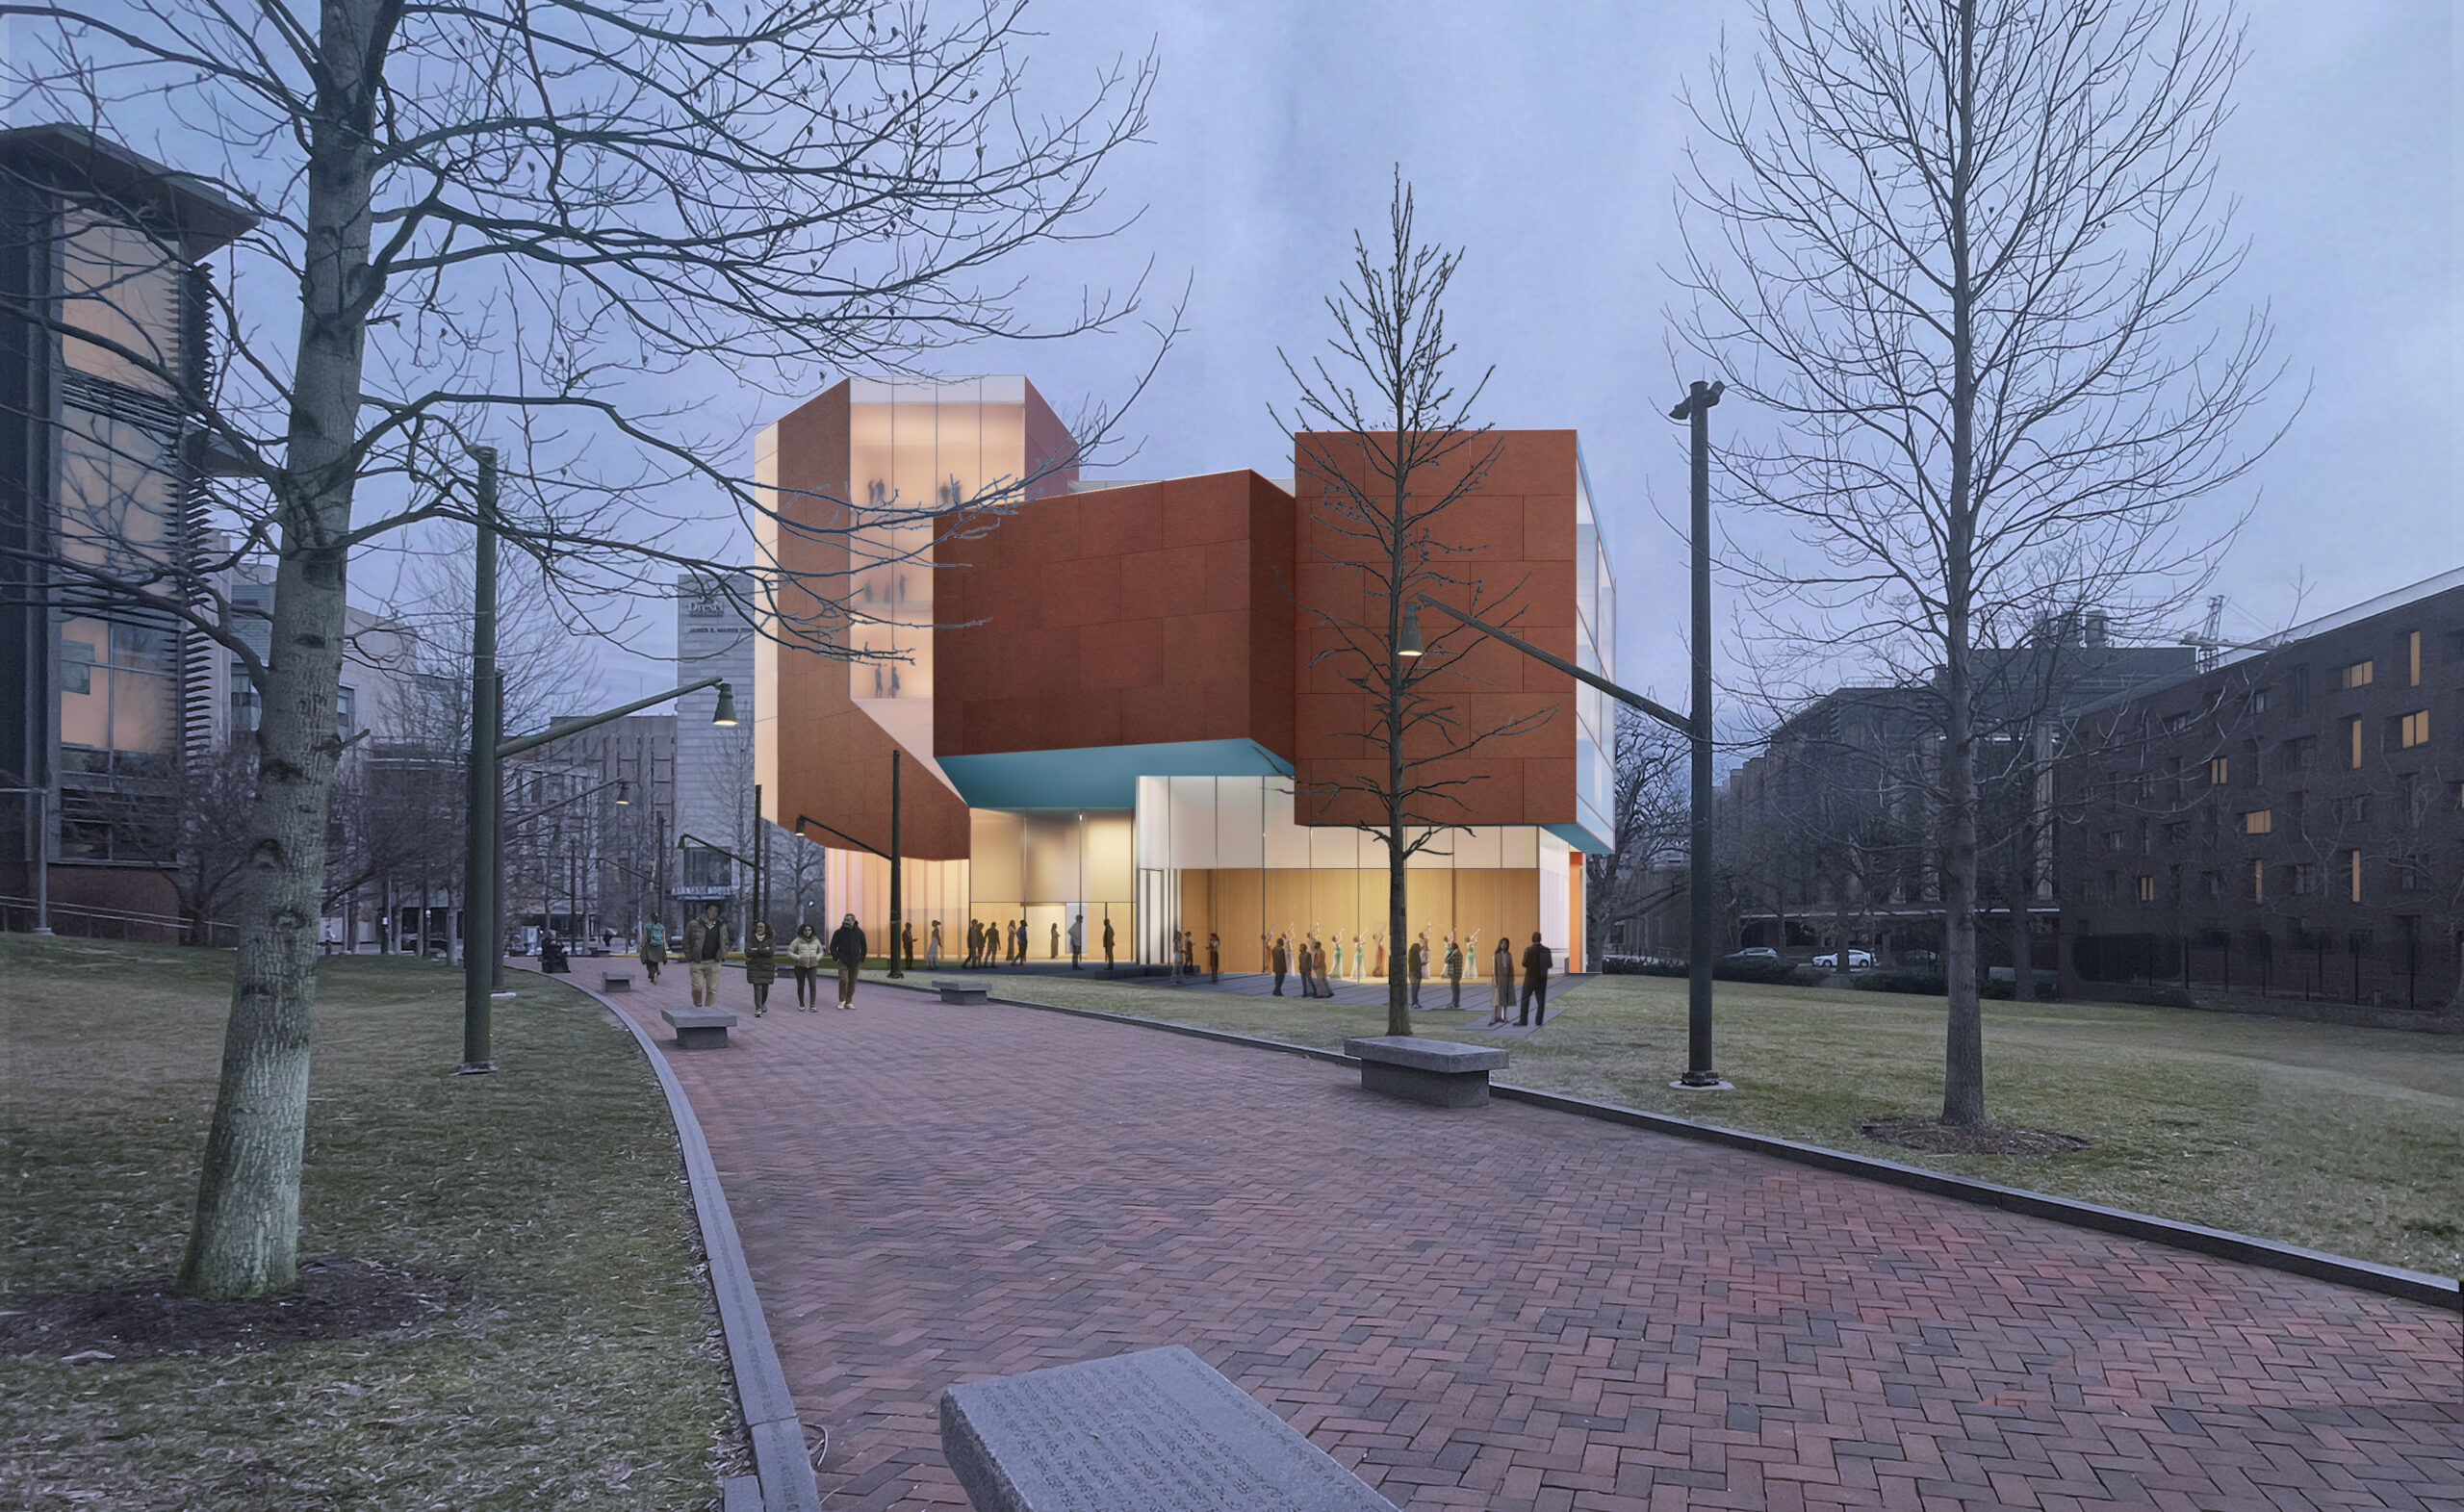 UNIVERSITY OF PENNSYLVANIA SELECTS STEVEN HOLL ARCHITECTS FOR NEW STUDENT PERFORMING ARTS CENTER